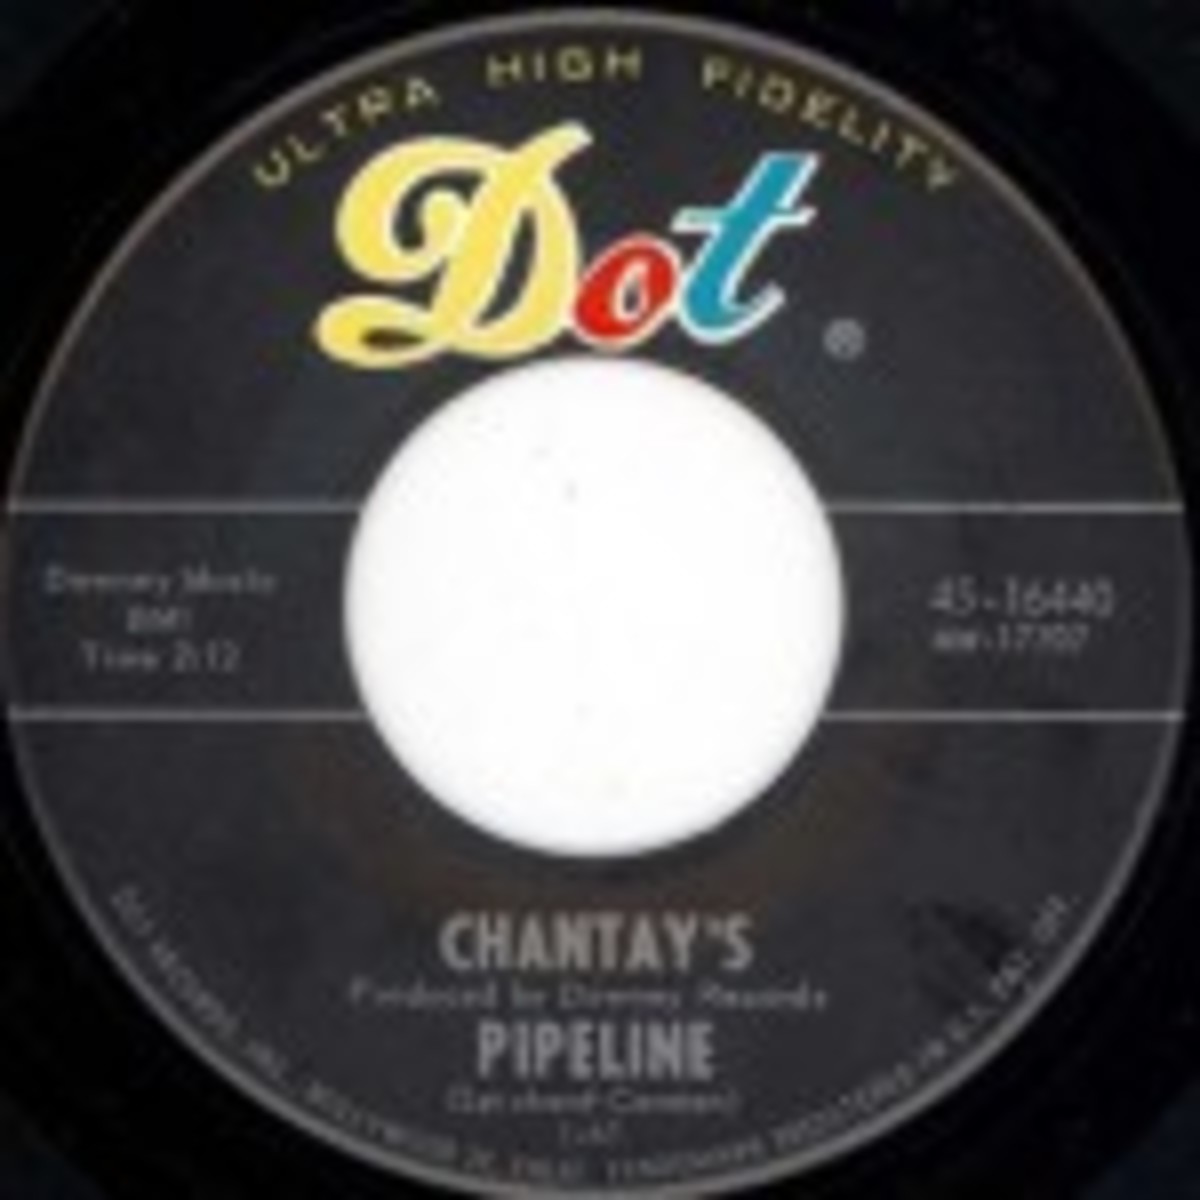 Pipeline by The Chantays